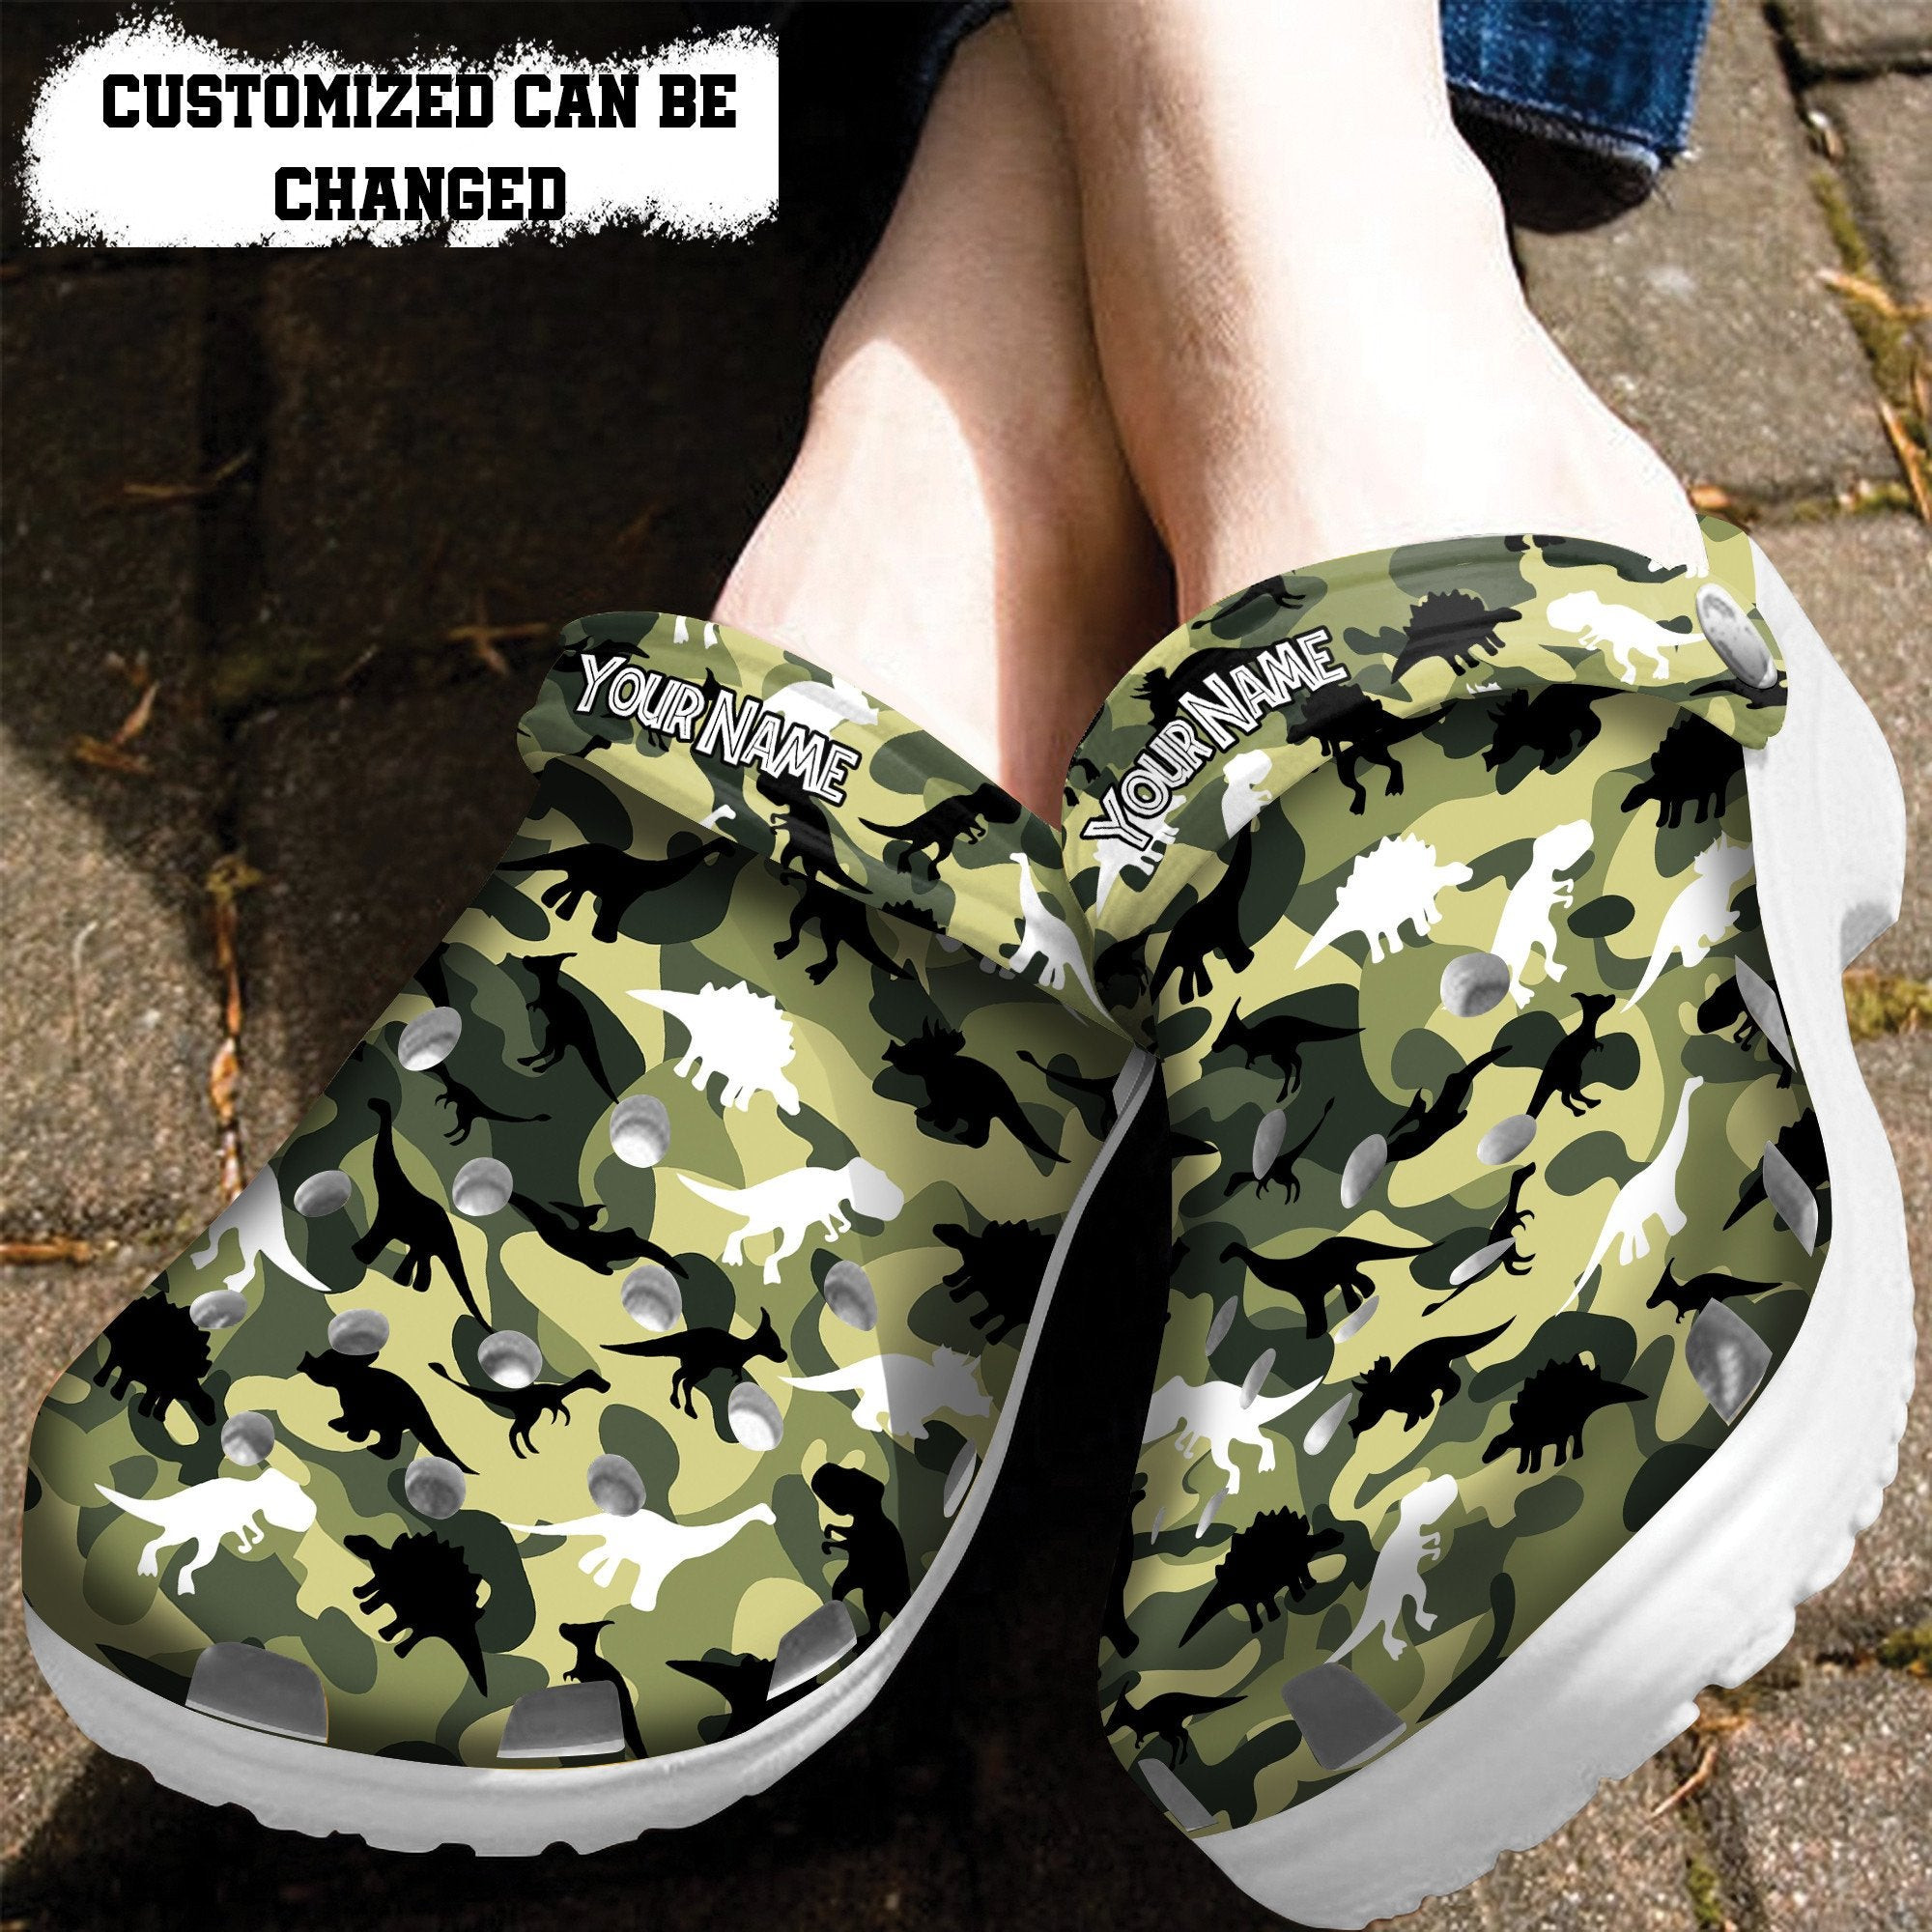 Dinosaur Camo Military Crocs Shoes Gifts Son Husband - Dinosaur Camouflage Shoes Croc Clogs Customize Father Day Gift